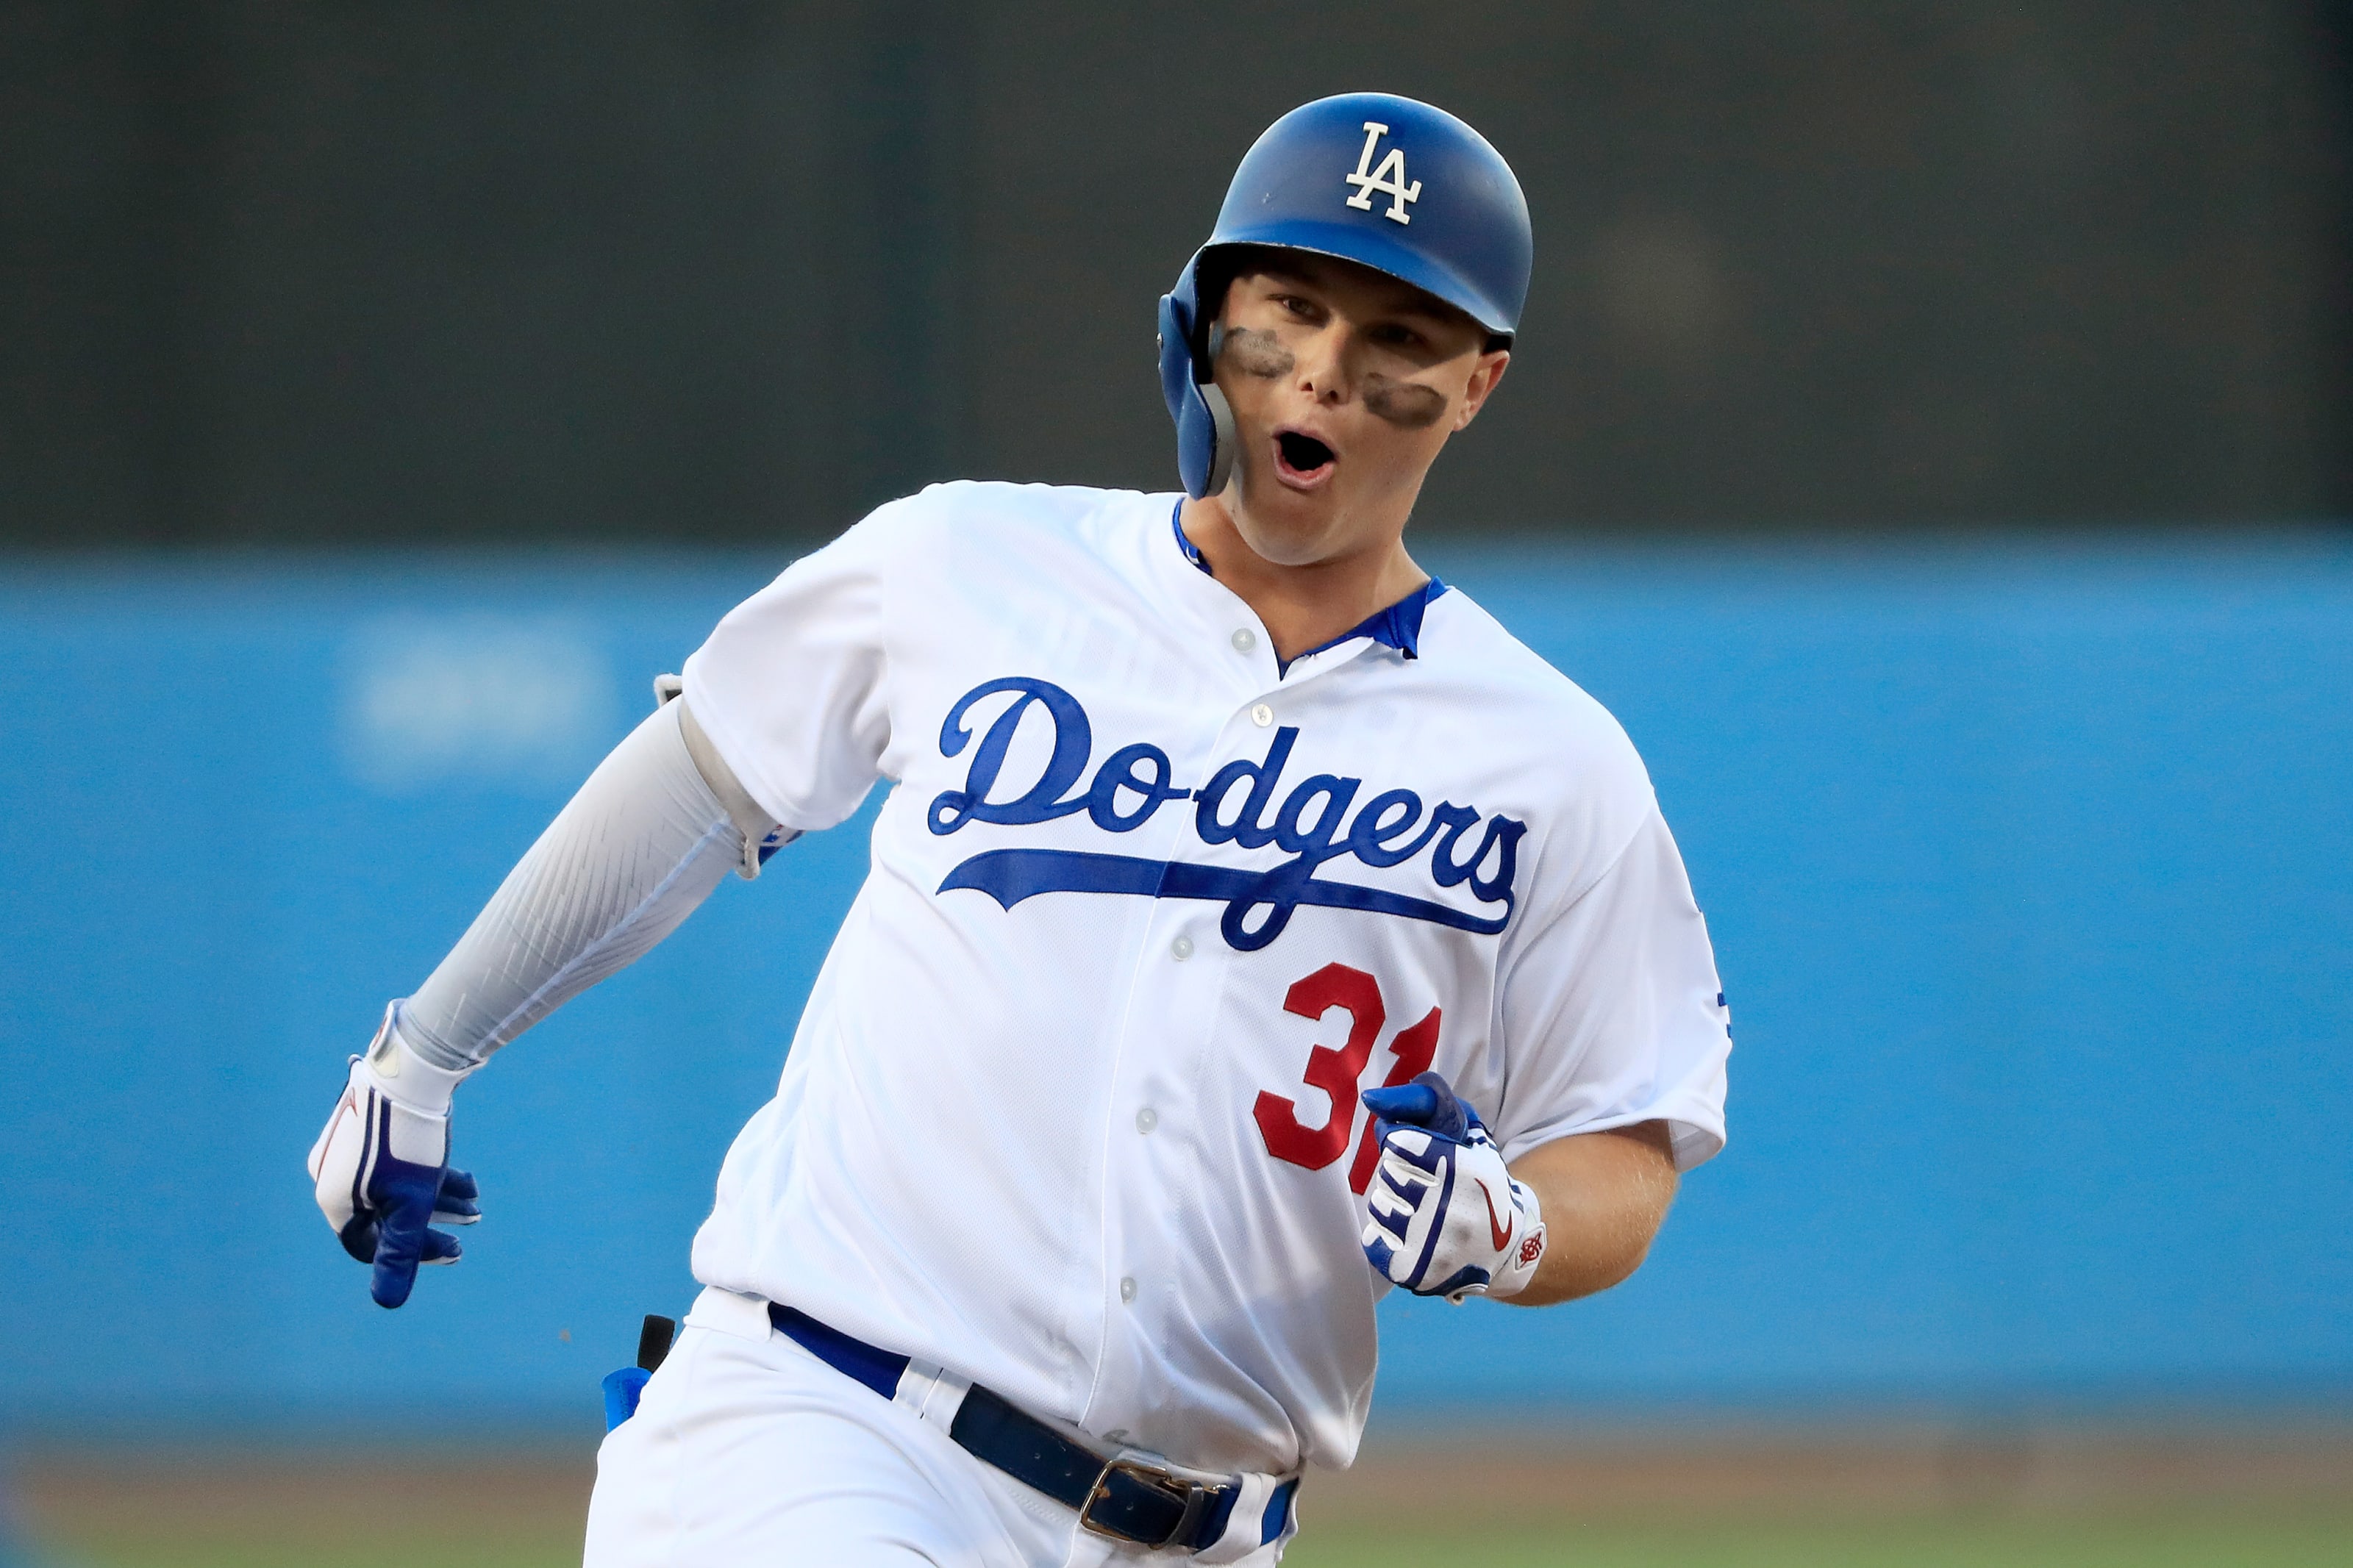 Seattle Mariners: Trading for Joc Pederson from L.A. - 3 scenarios